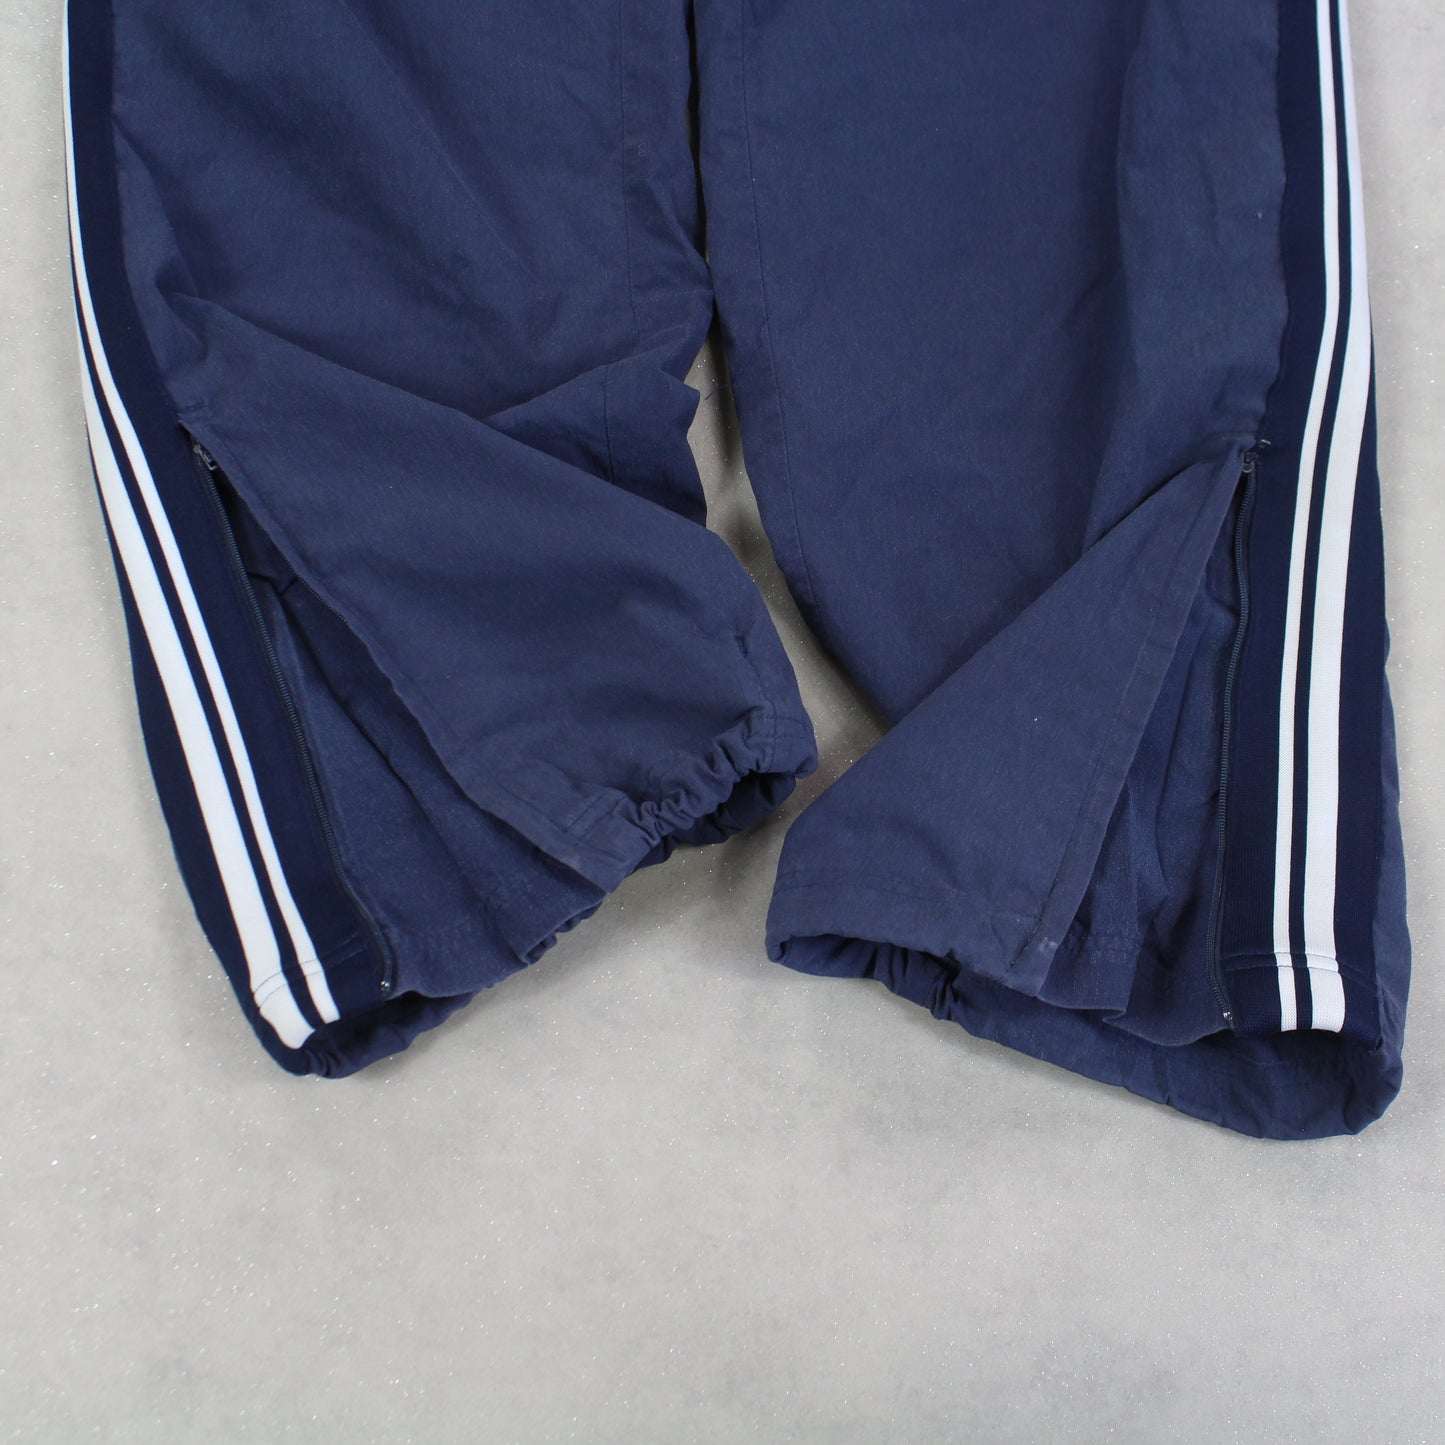 Vintage 00s Nike Trackpants Navy - (S)